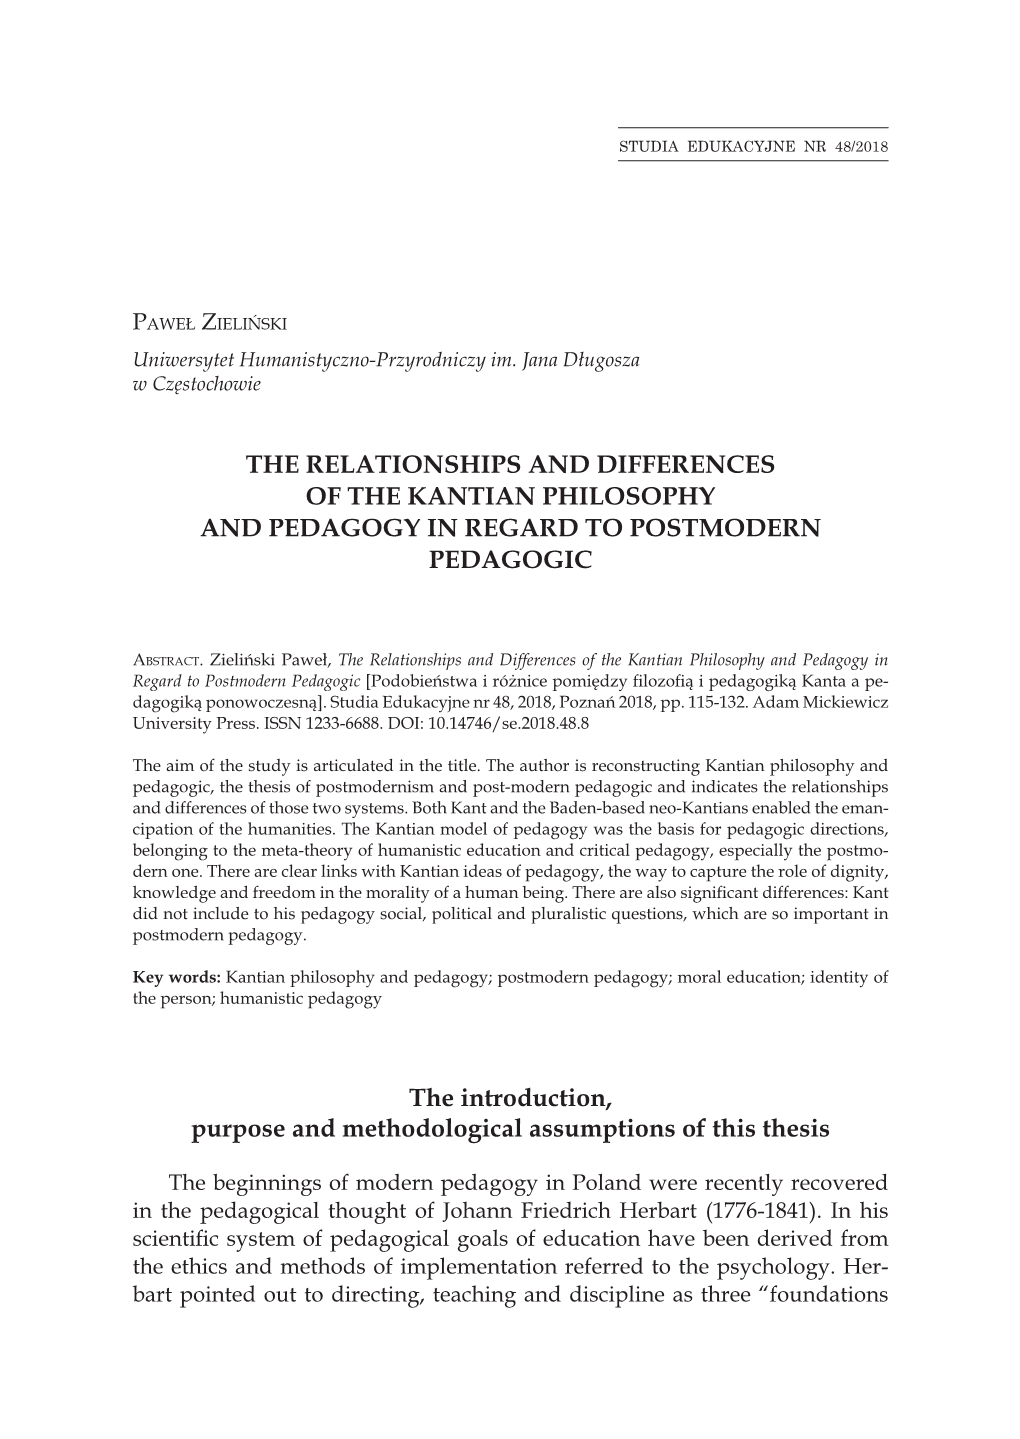 The Relationships and Differences of the Kantian Philosophy and Pedagogy in Regard to Postmodern Pedagogic